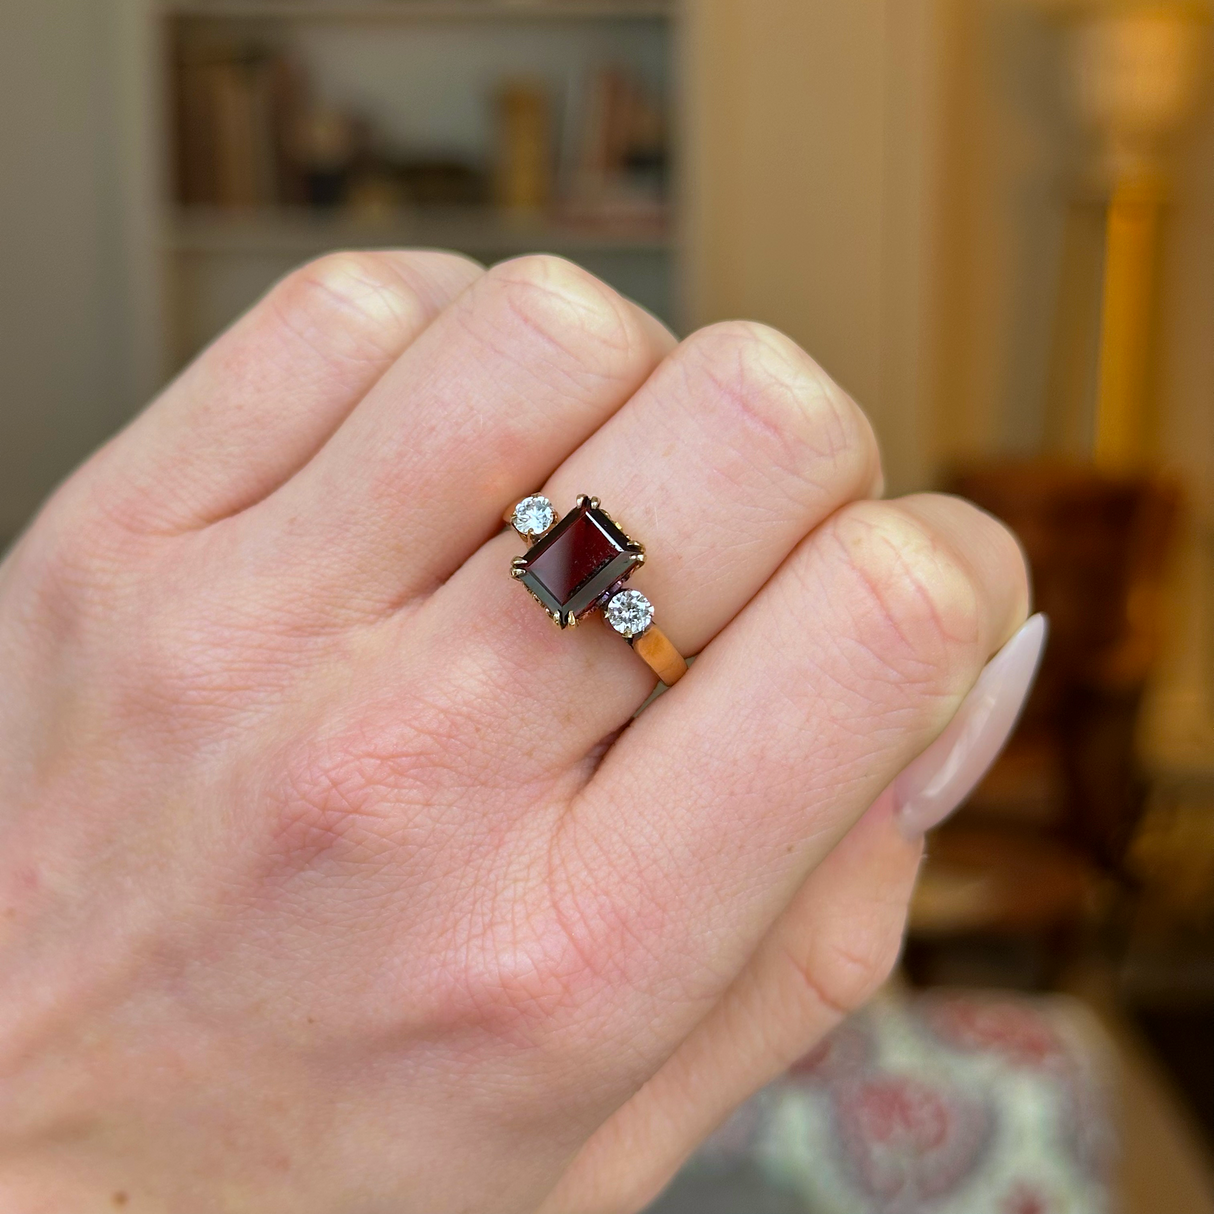 Vintage, 1940s Three-Stone Garnet and Diamond Ring, 18ct Rosy Yellow Gold worn on closed hand.